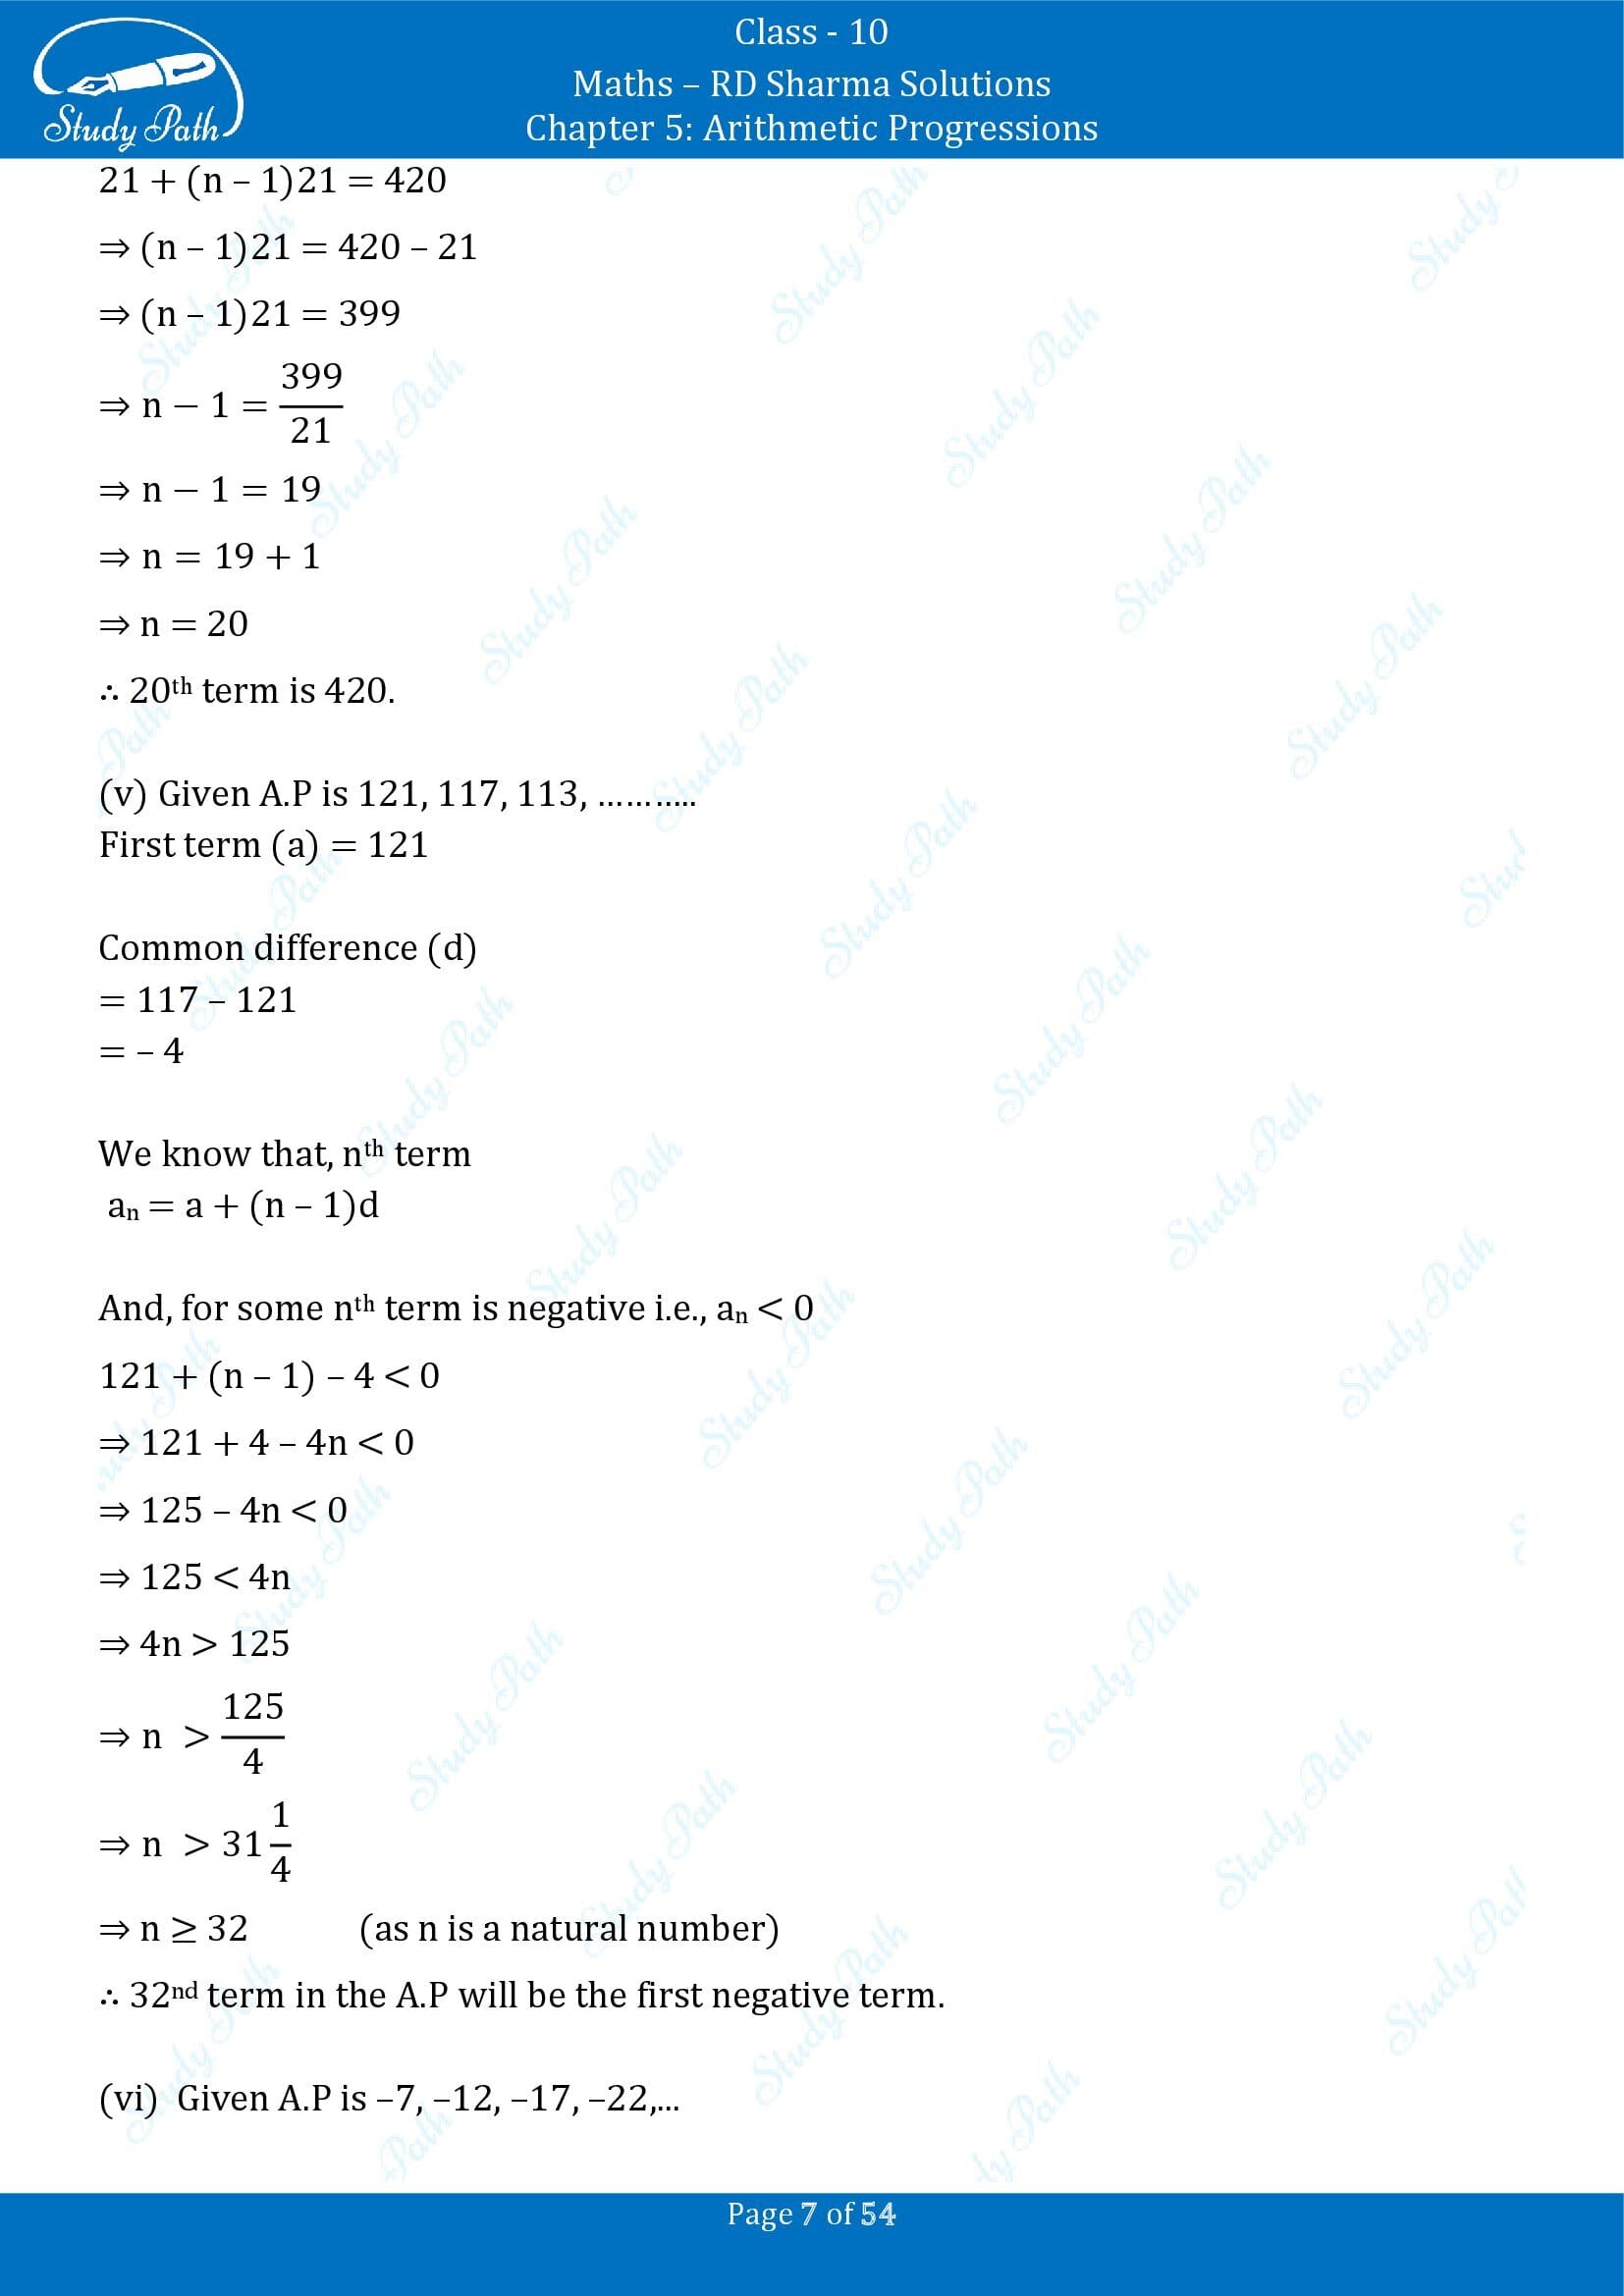 RD Sharma Solutions Class 10 Chapter 5 Arithmetic Progressions Exercise 5.4 00007